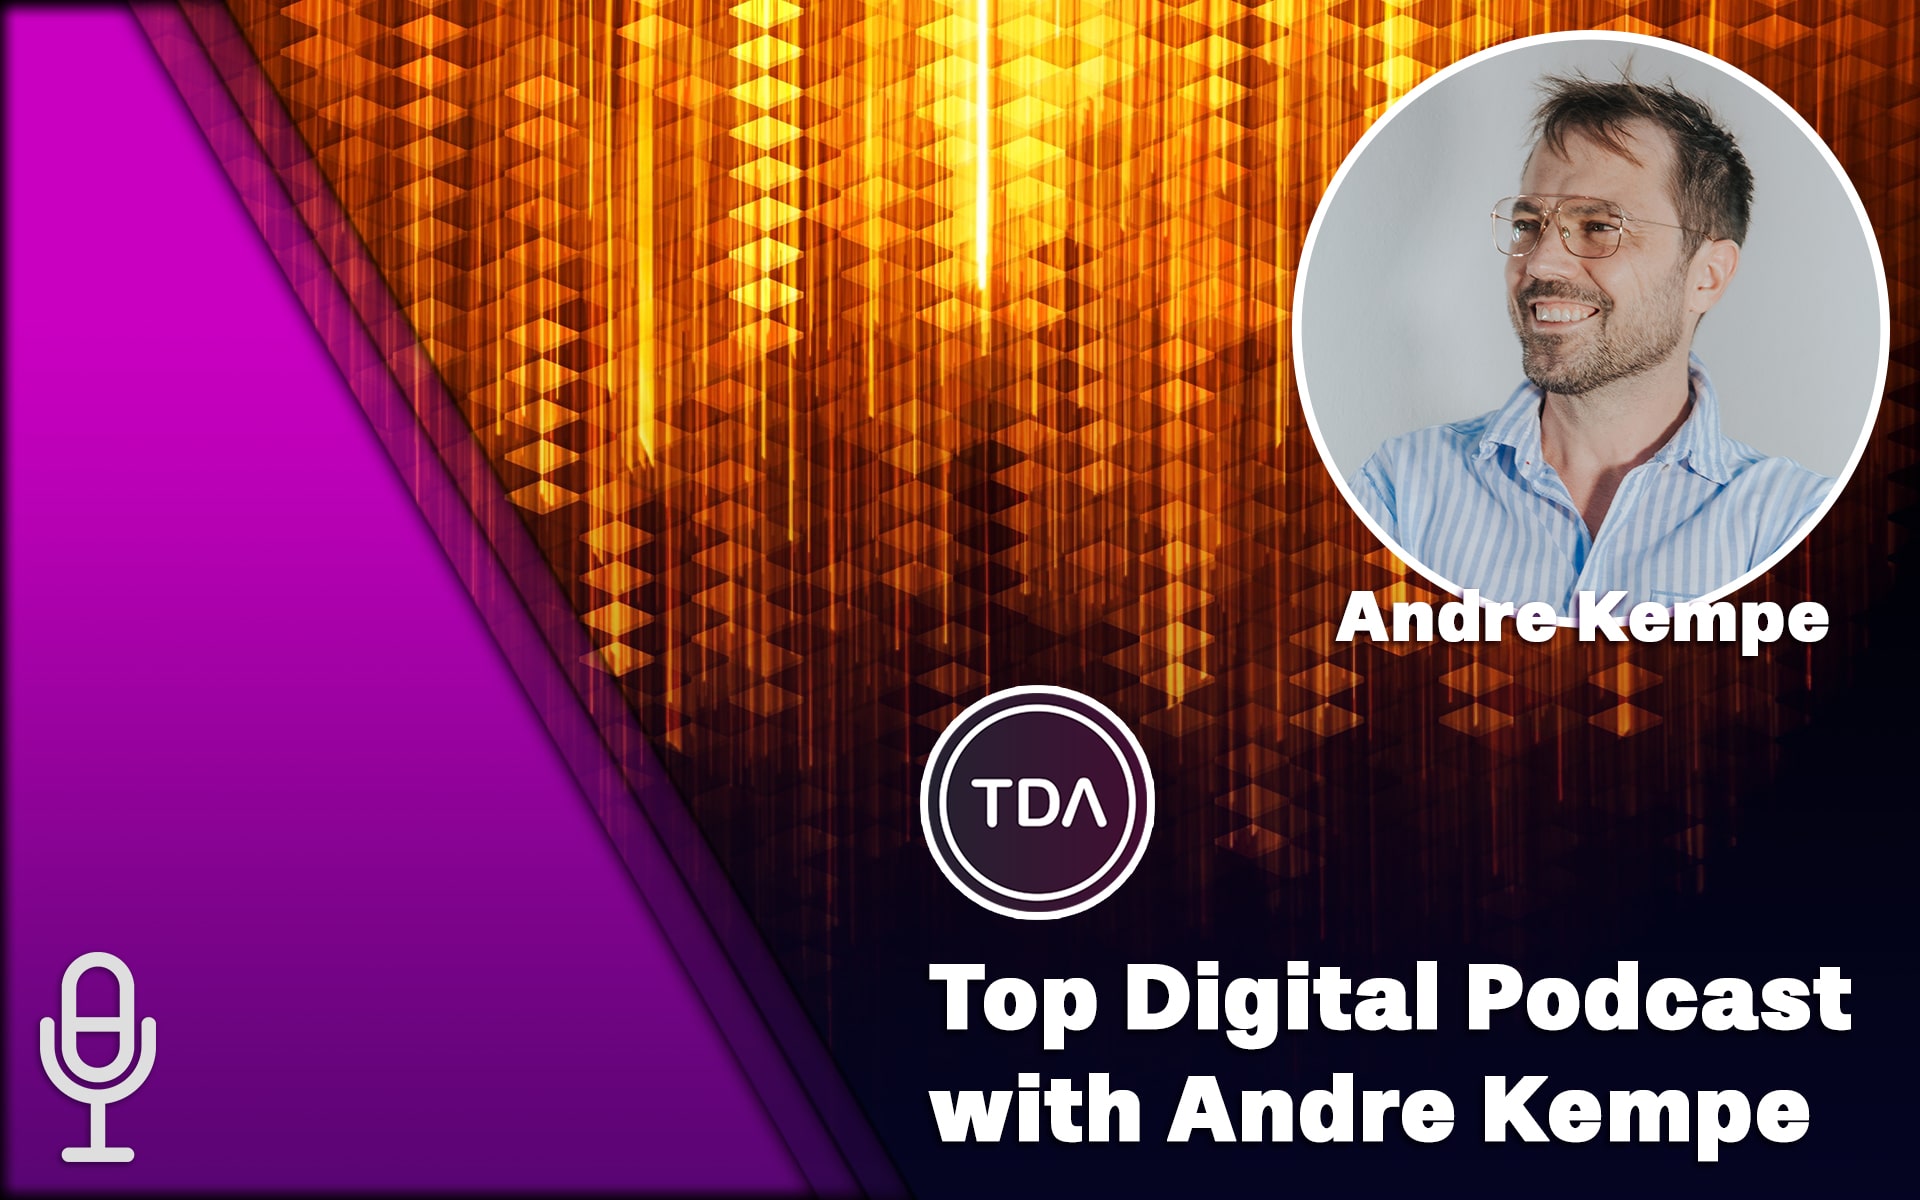 Top Digital Podcast with Andre Kempe